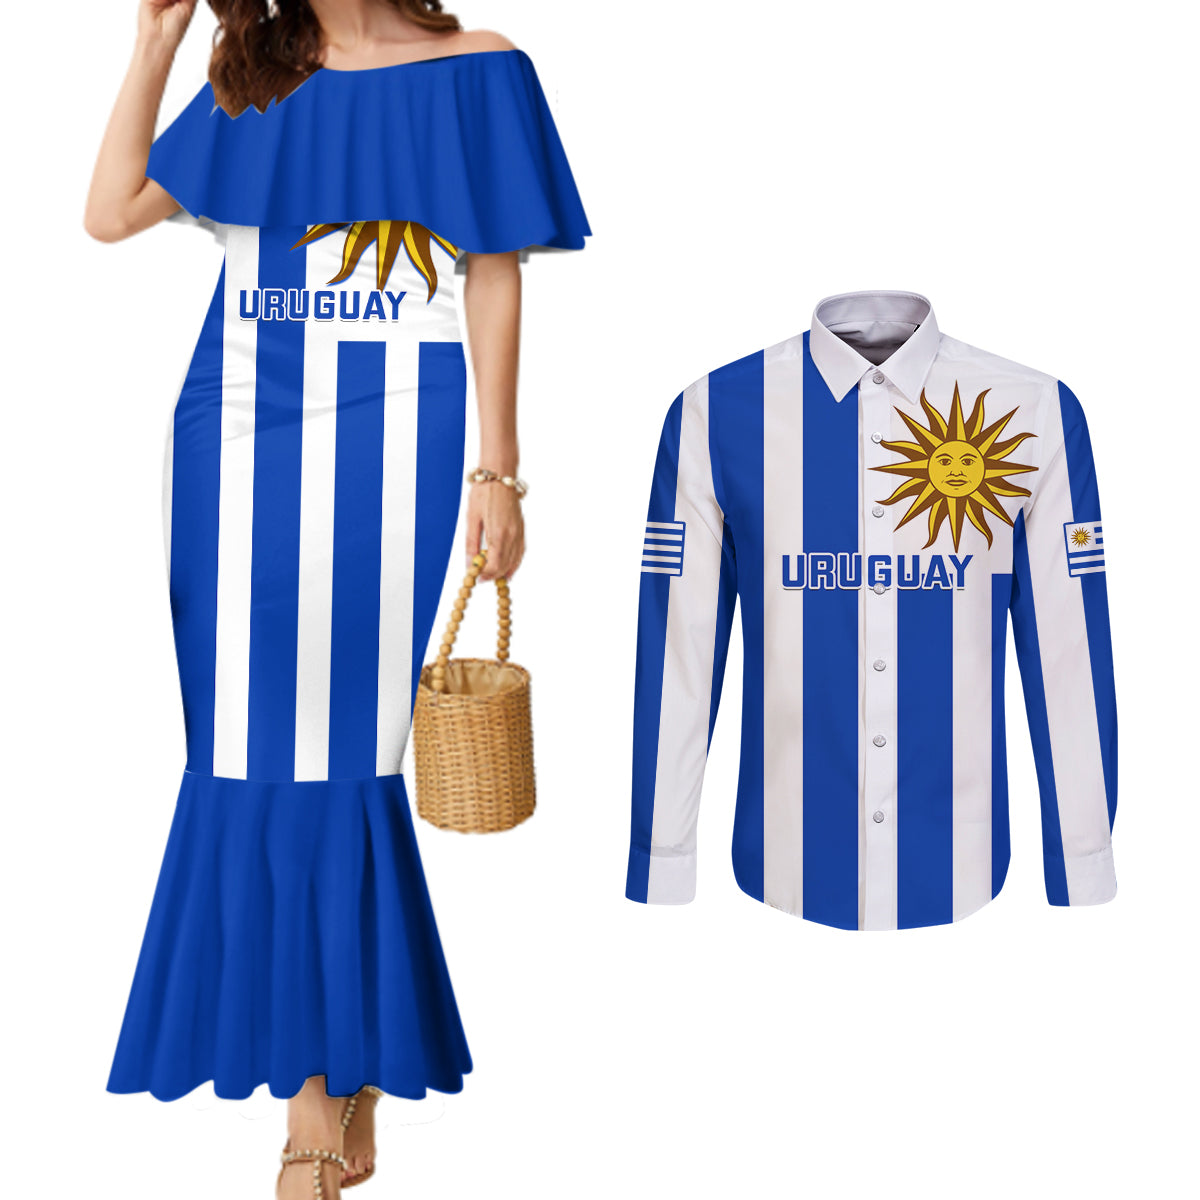 custom-uruguay-rugby-couples-matching-mermaid-dress-and-long-sleeve-button-shirts-go-los-teros-flag-style